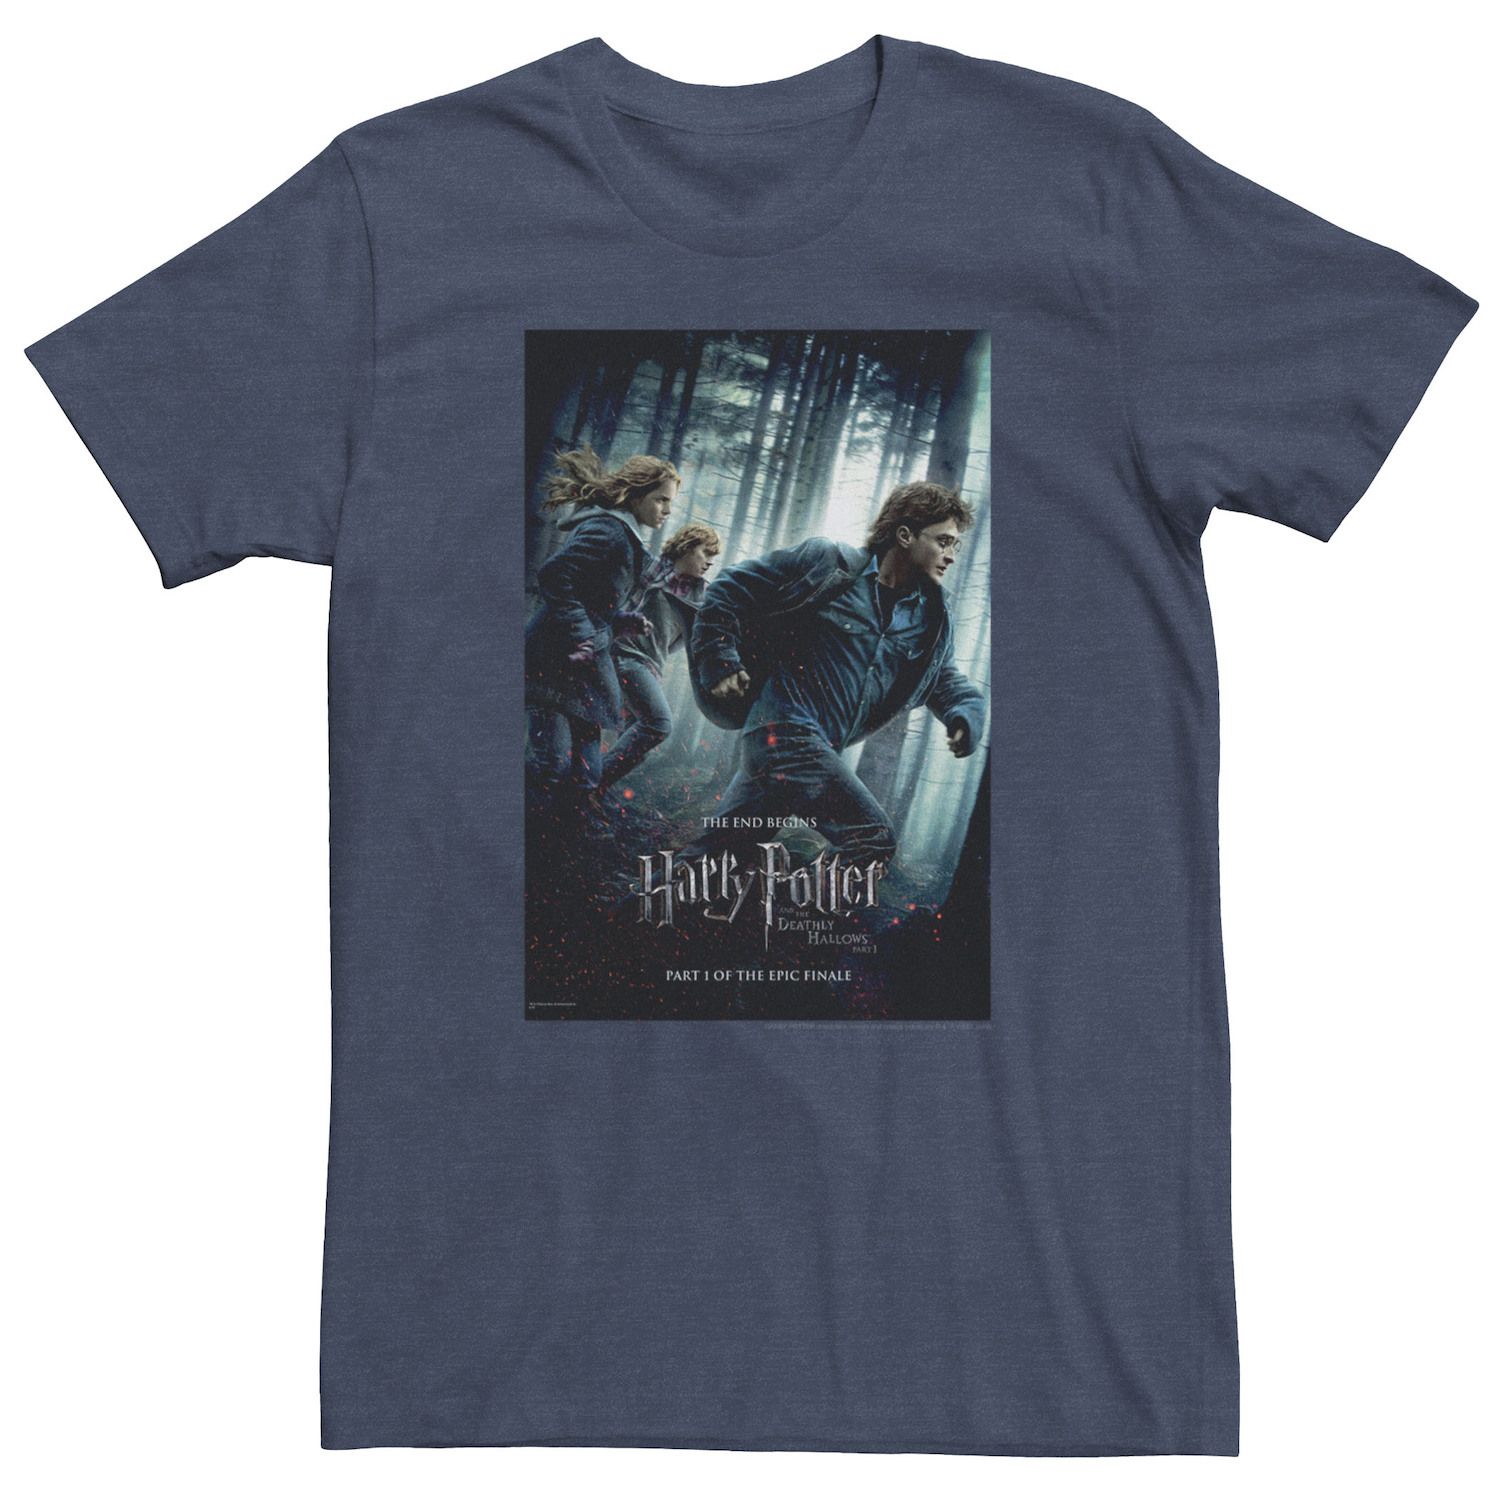 Image for Harry Potter Big & Tall Deathly Hallows Group Shot Poster Tee at Kohl's.